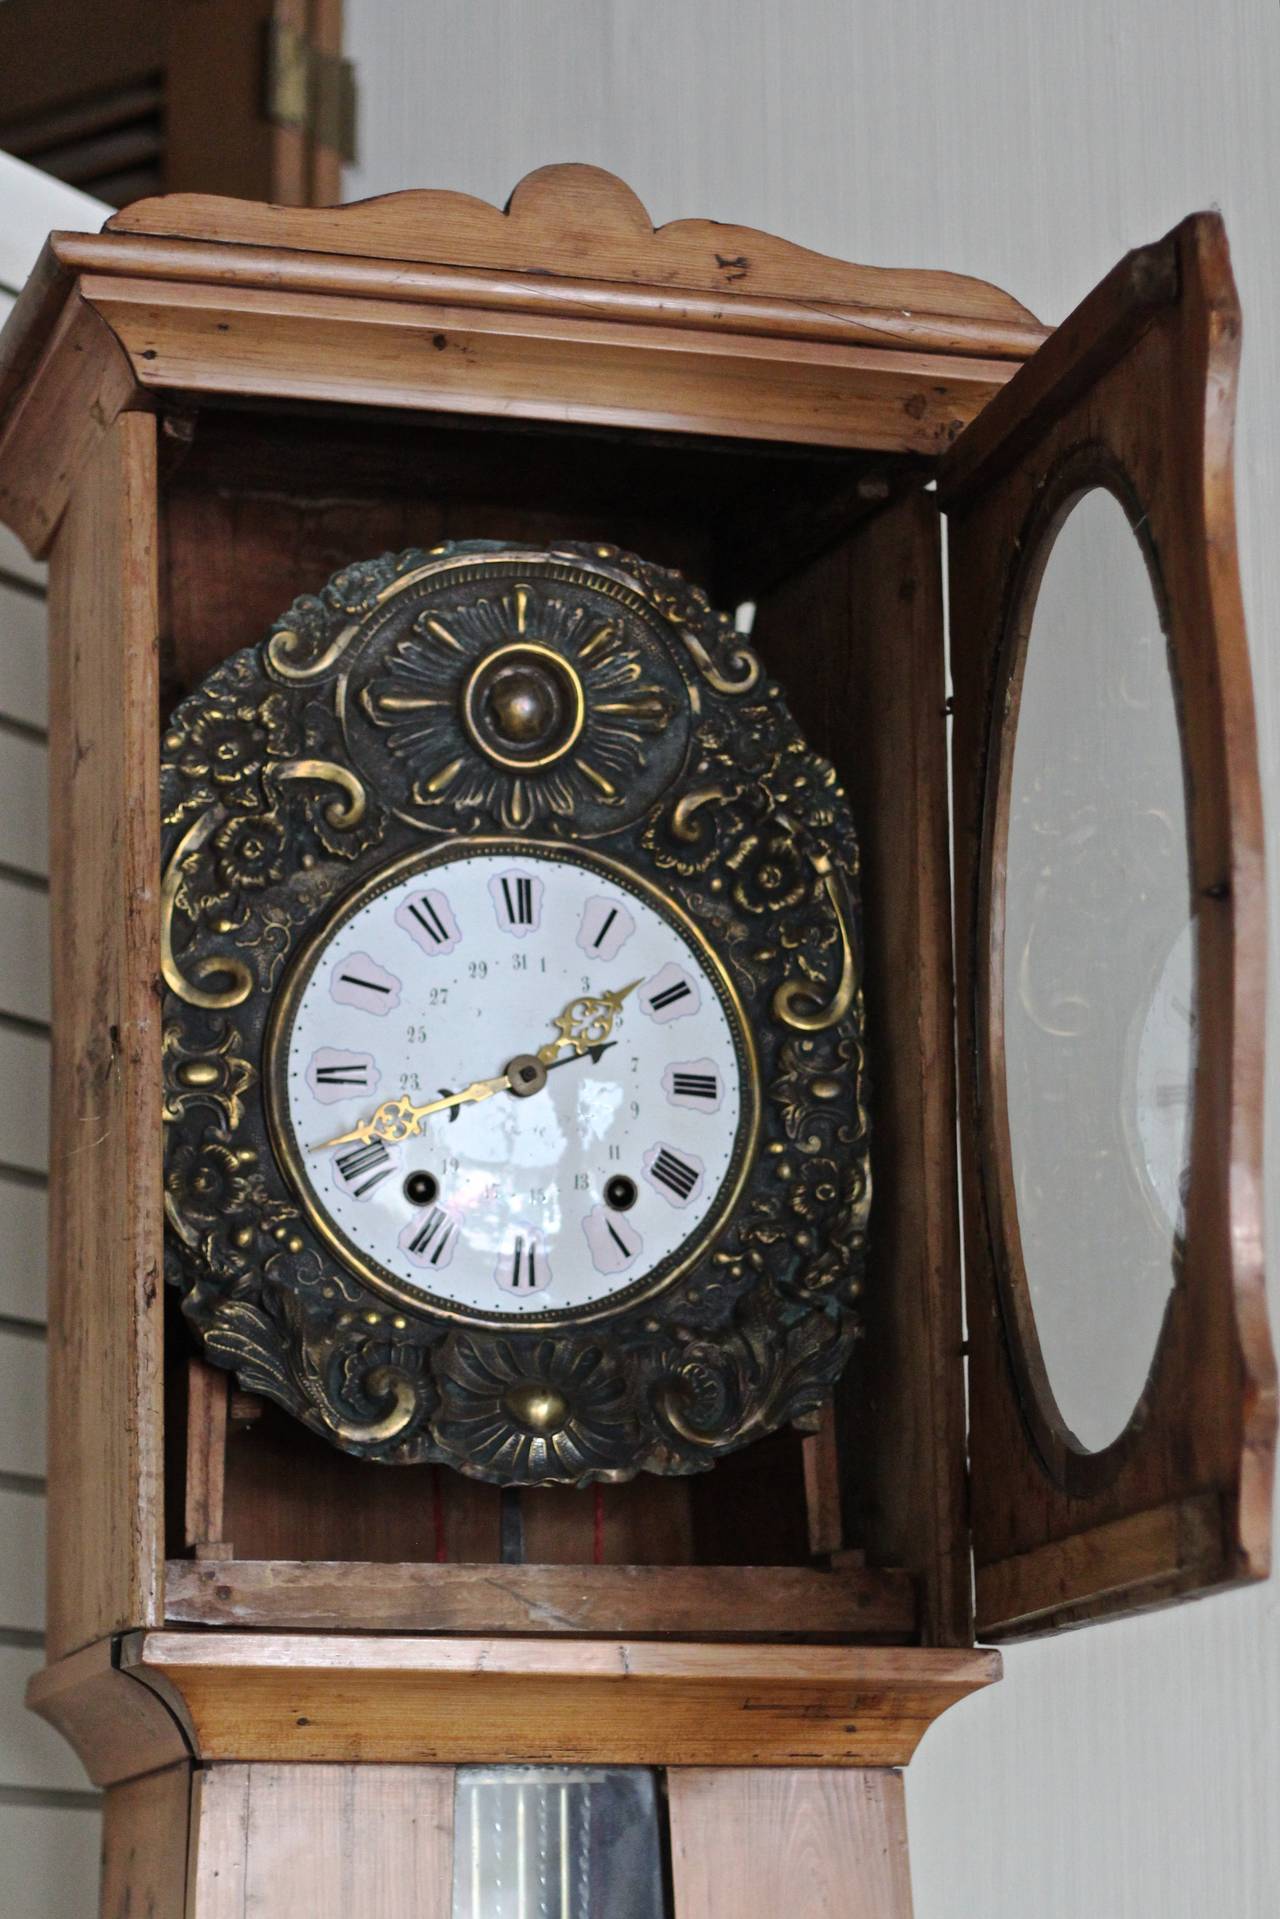 Long case clock with floral brass surround on enamel face.  Faint floral art along bottom section. Eight day repeating chimes at two minutes past the hour and at the half hour.